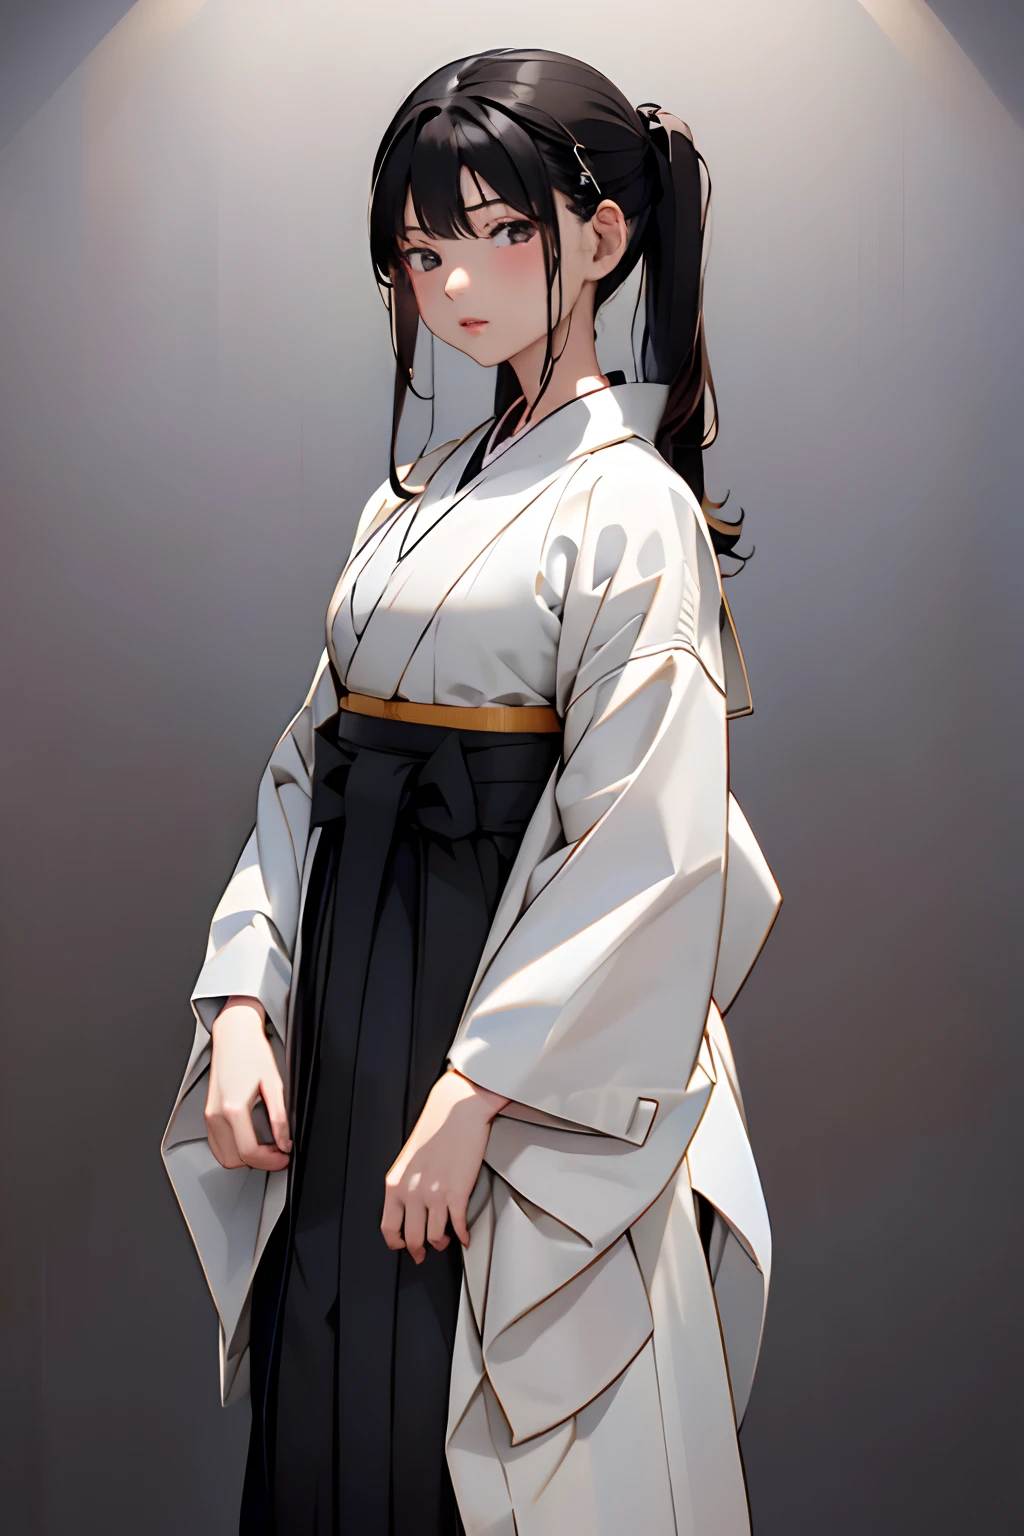 top-quality、​masterpiece、(((1 girl in)))、Solo、((Black background:1.1))、Black background、Full Body Angle、(((White jacket and black hakama:1.3)))、Hakama、Dignified appearance、Standing、black backgrounds、A dark-haired:1.5、Brown eyes、red-lips、white  clothes、Black and white world、Black and white world、light skinned、Long straight hair、Silky black hair、